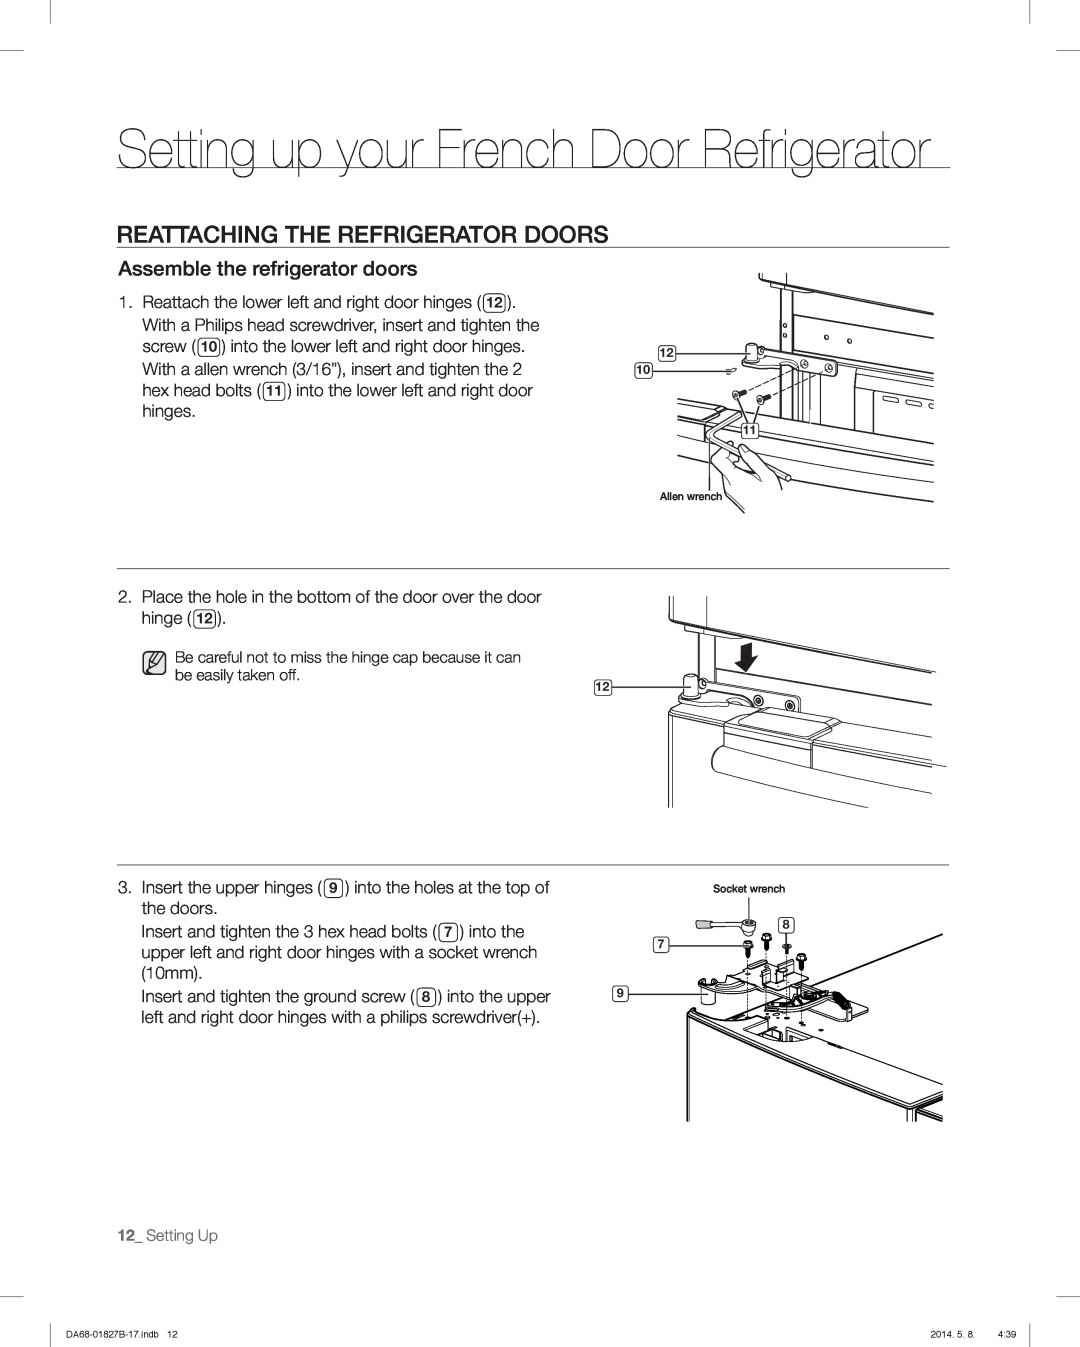 Samsung RFG237AARS, RFG237AAWP, RFG237AABP Reattaching The Refrigerator Doors, Setting up your French Door Refrigerator 